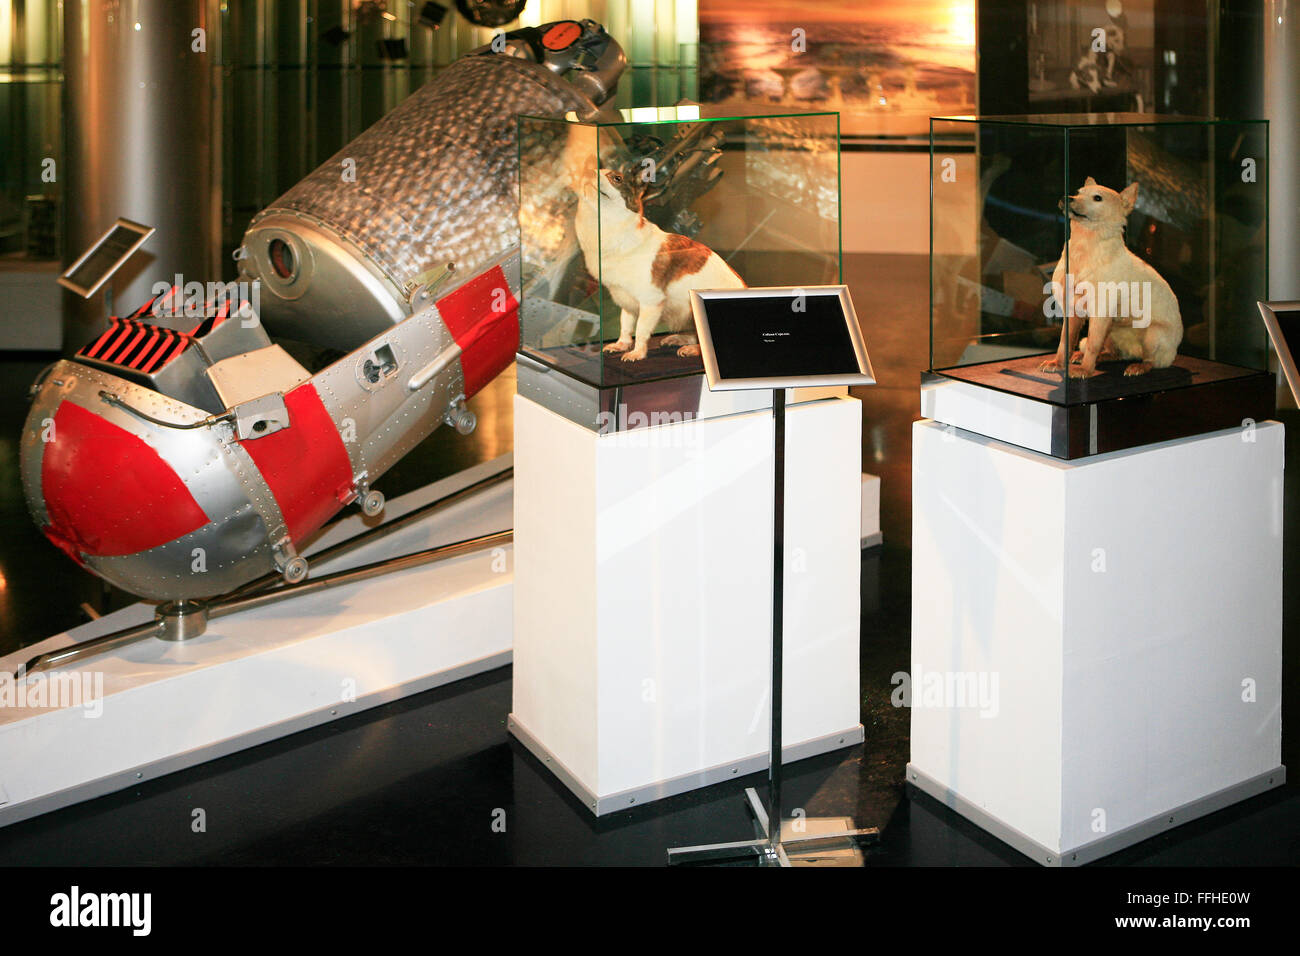 The Soviet space dogs Belka (Squirrel) and Strelka (Little Arrow) at the Memorial Museum of Cosmonautics in Moscow, Russia Stock Photo